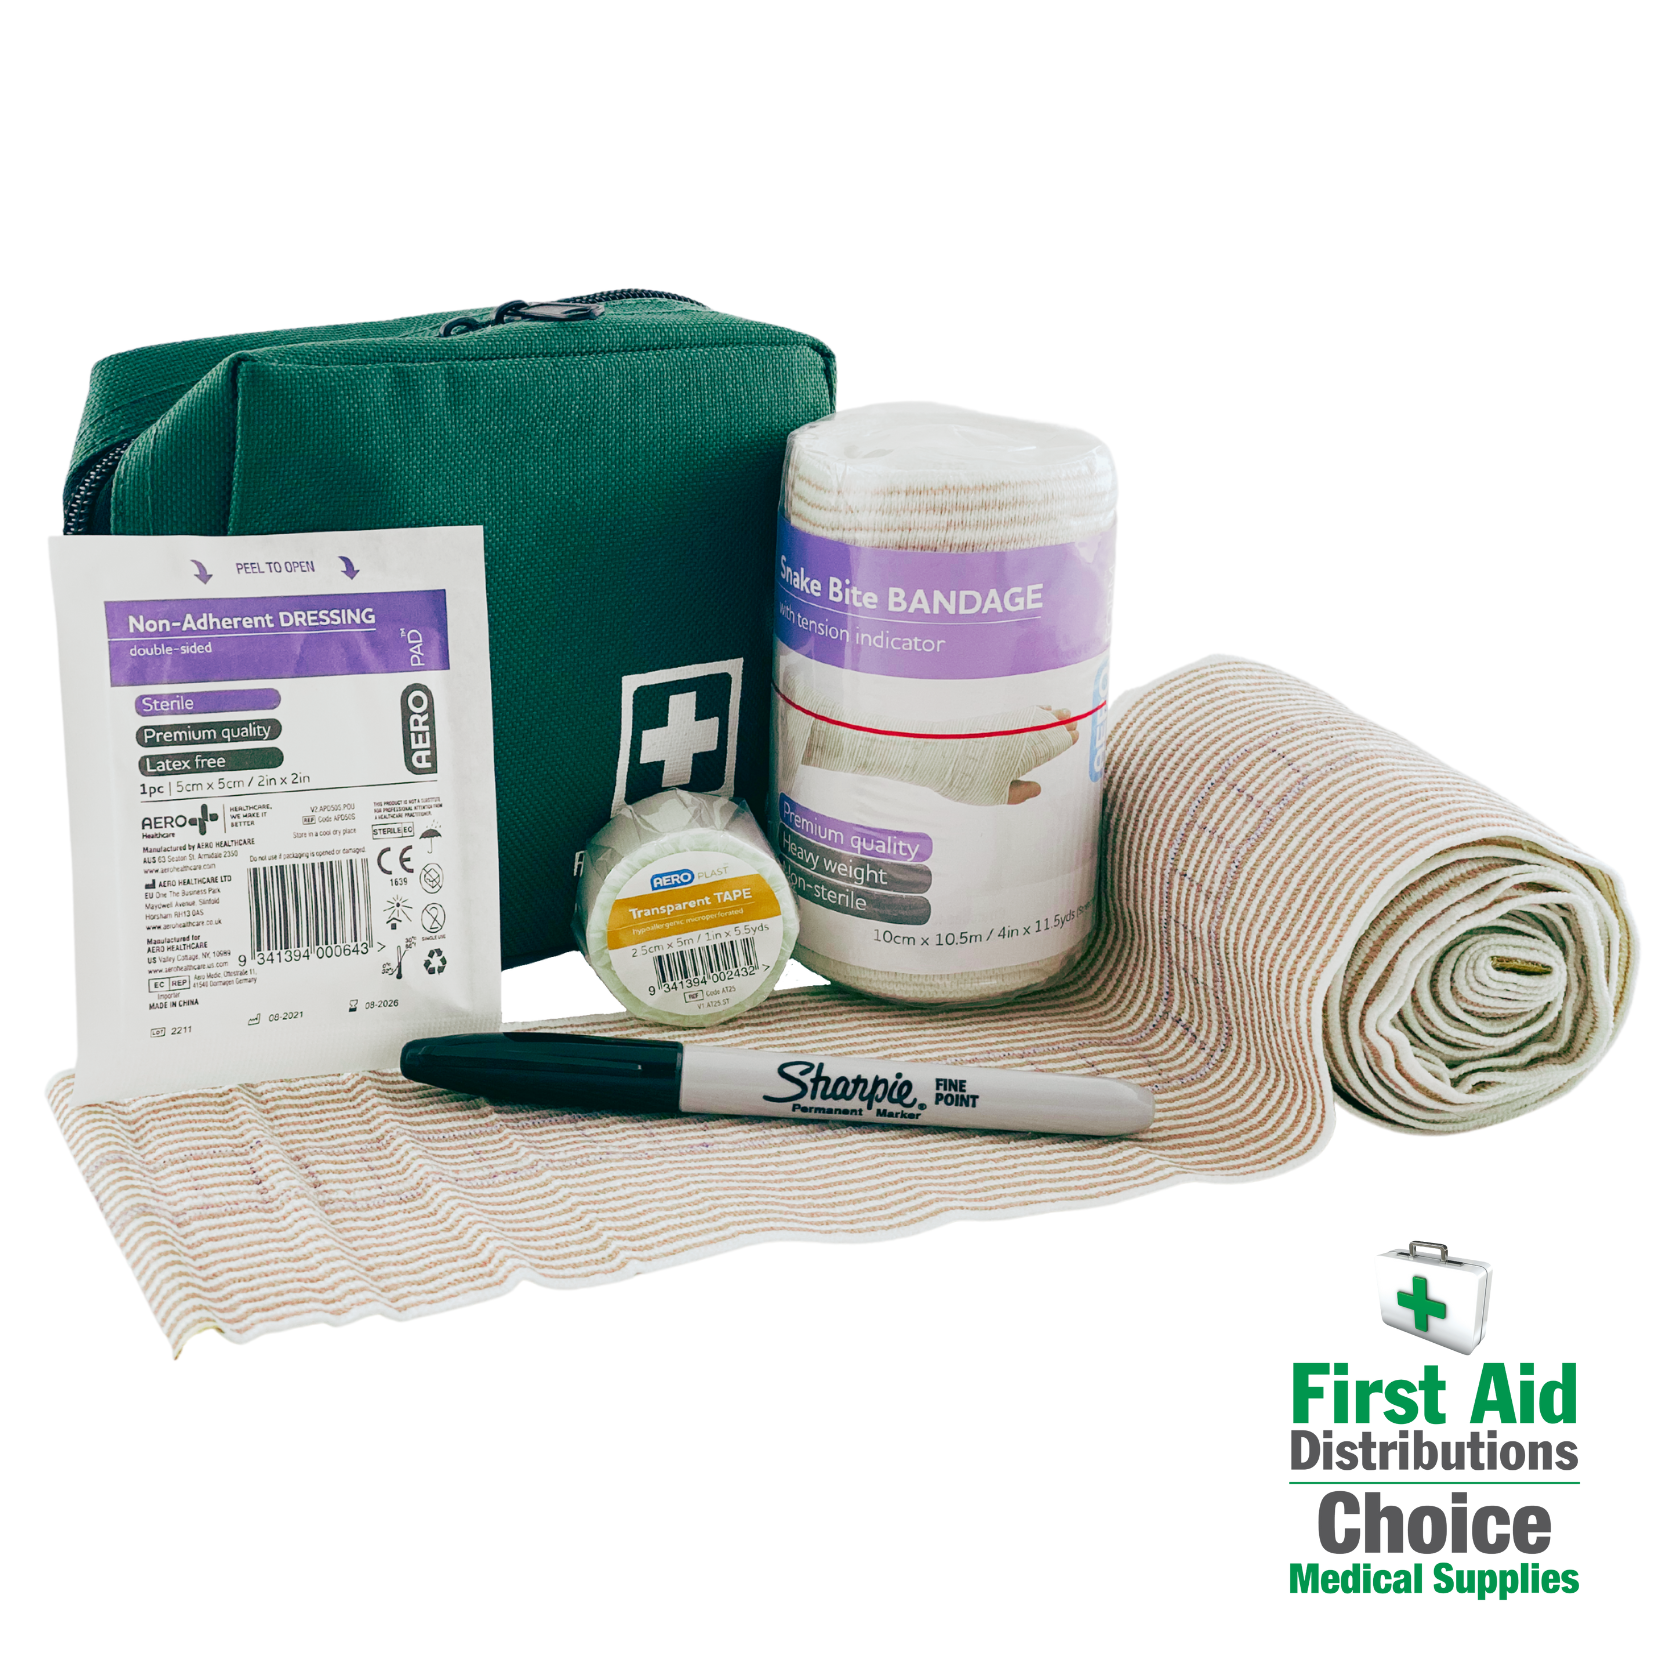 collections/Snake_Bite_Kit_First_Aid_Distributions_1.png